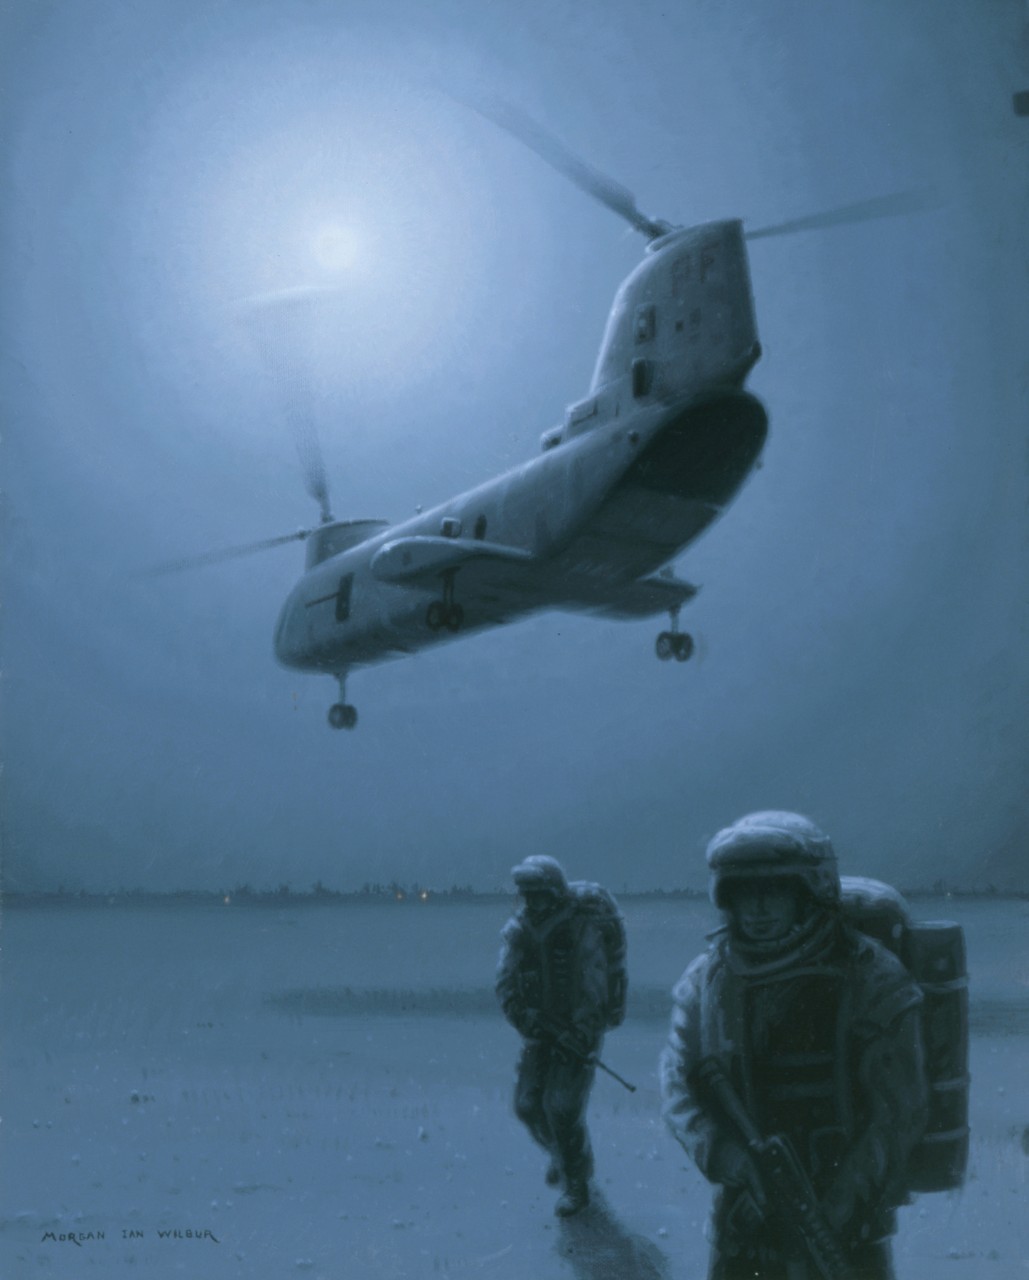 Two marines in the foreground with a helicopter flying above. The night scene is lit by a full moon